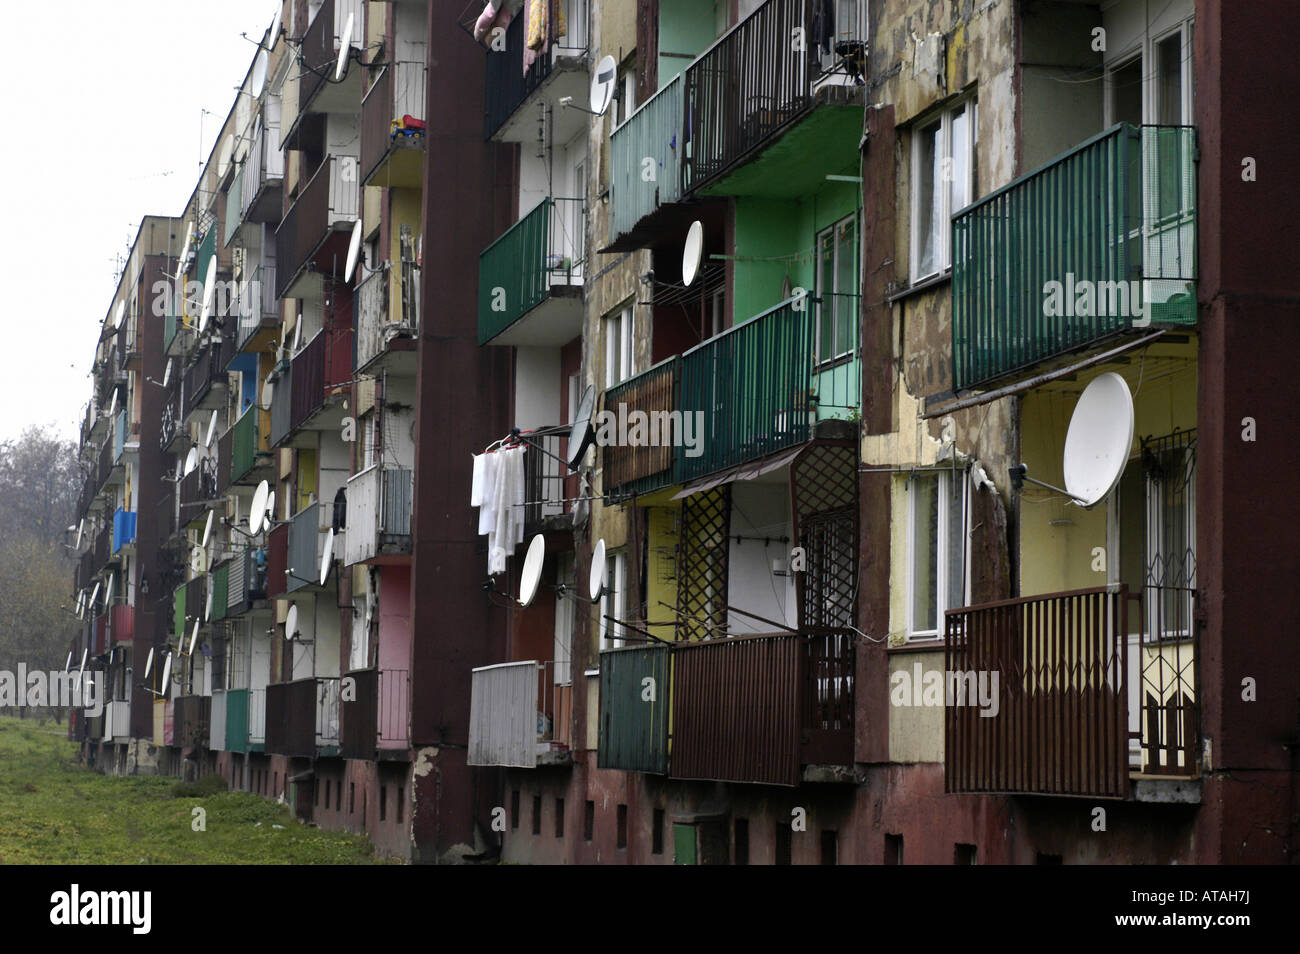 Balconies with dish antennas on a block of flats, Poland Stock Photo